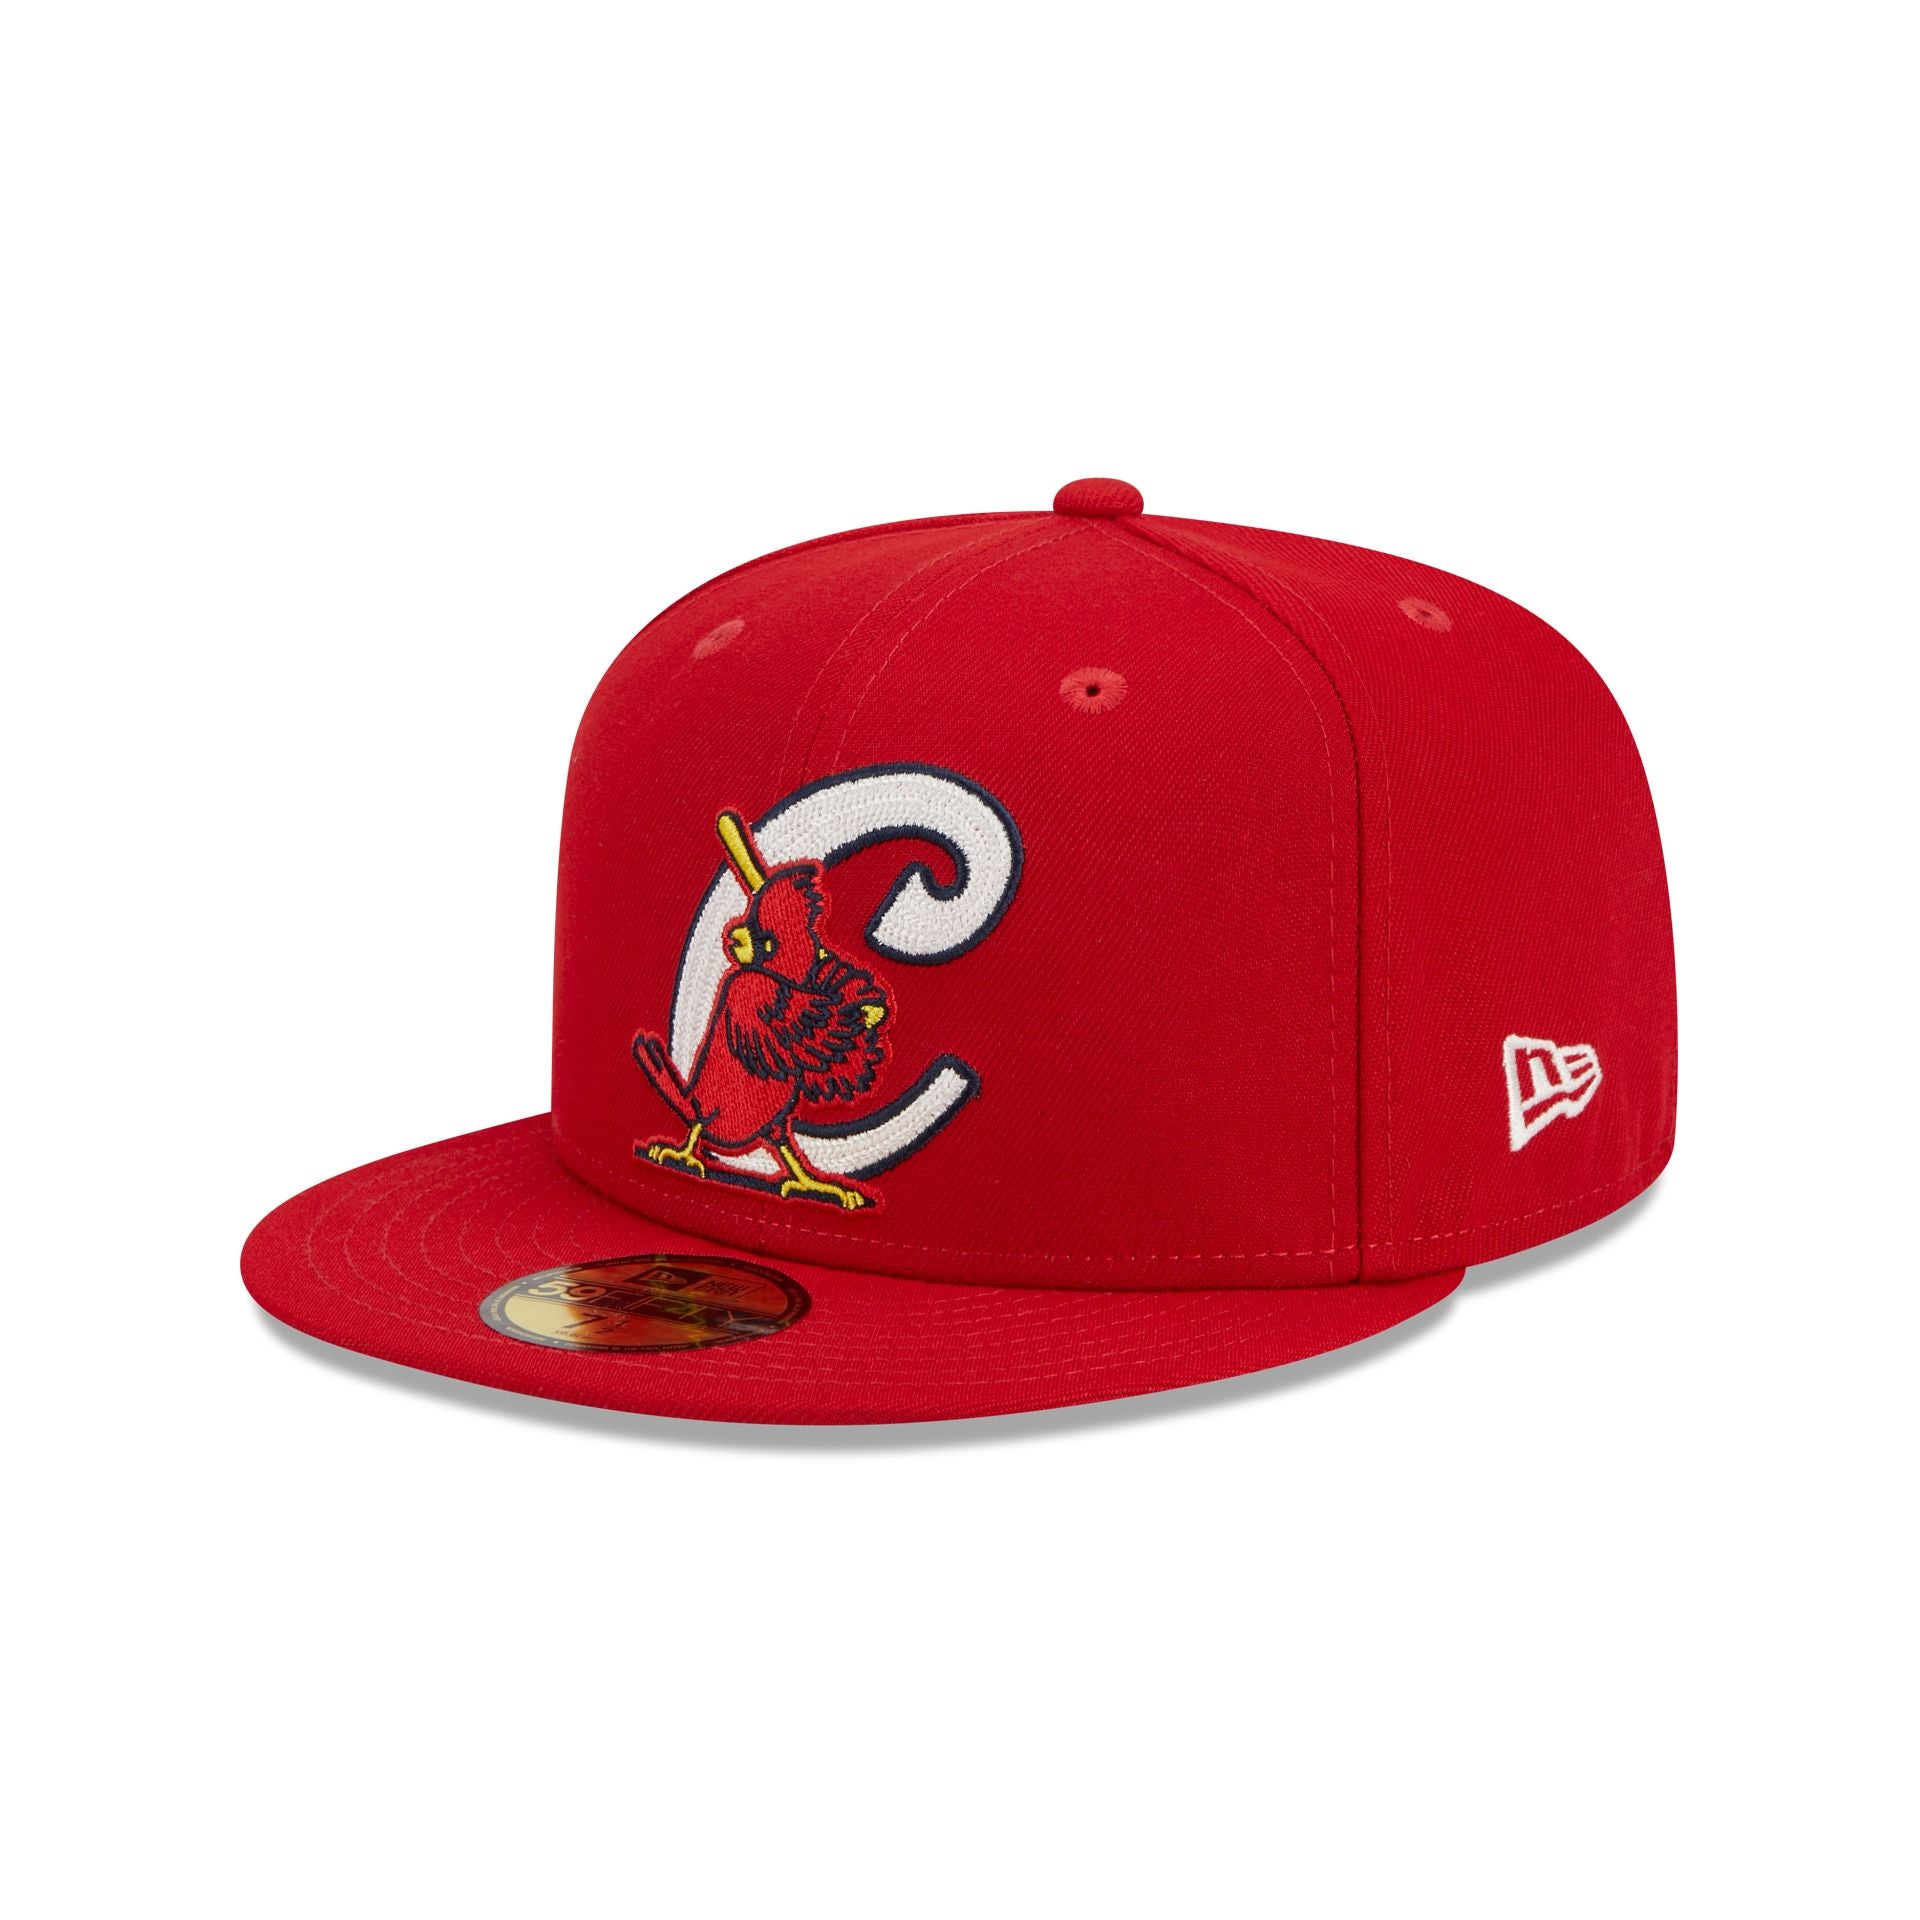 Louisville Cardinals New Era Basic 59FIFTY Fitted Hat - Red